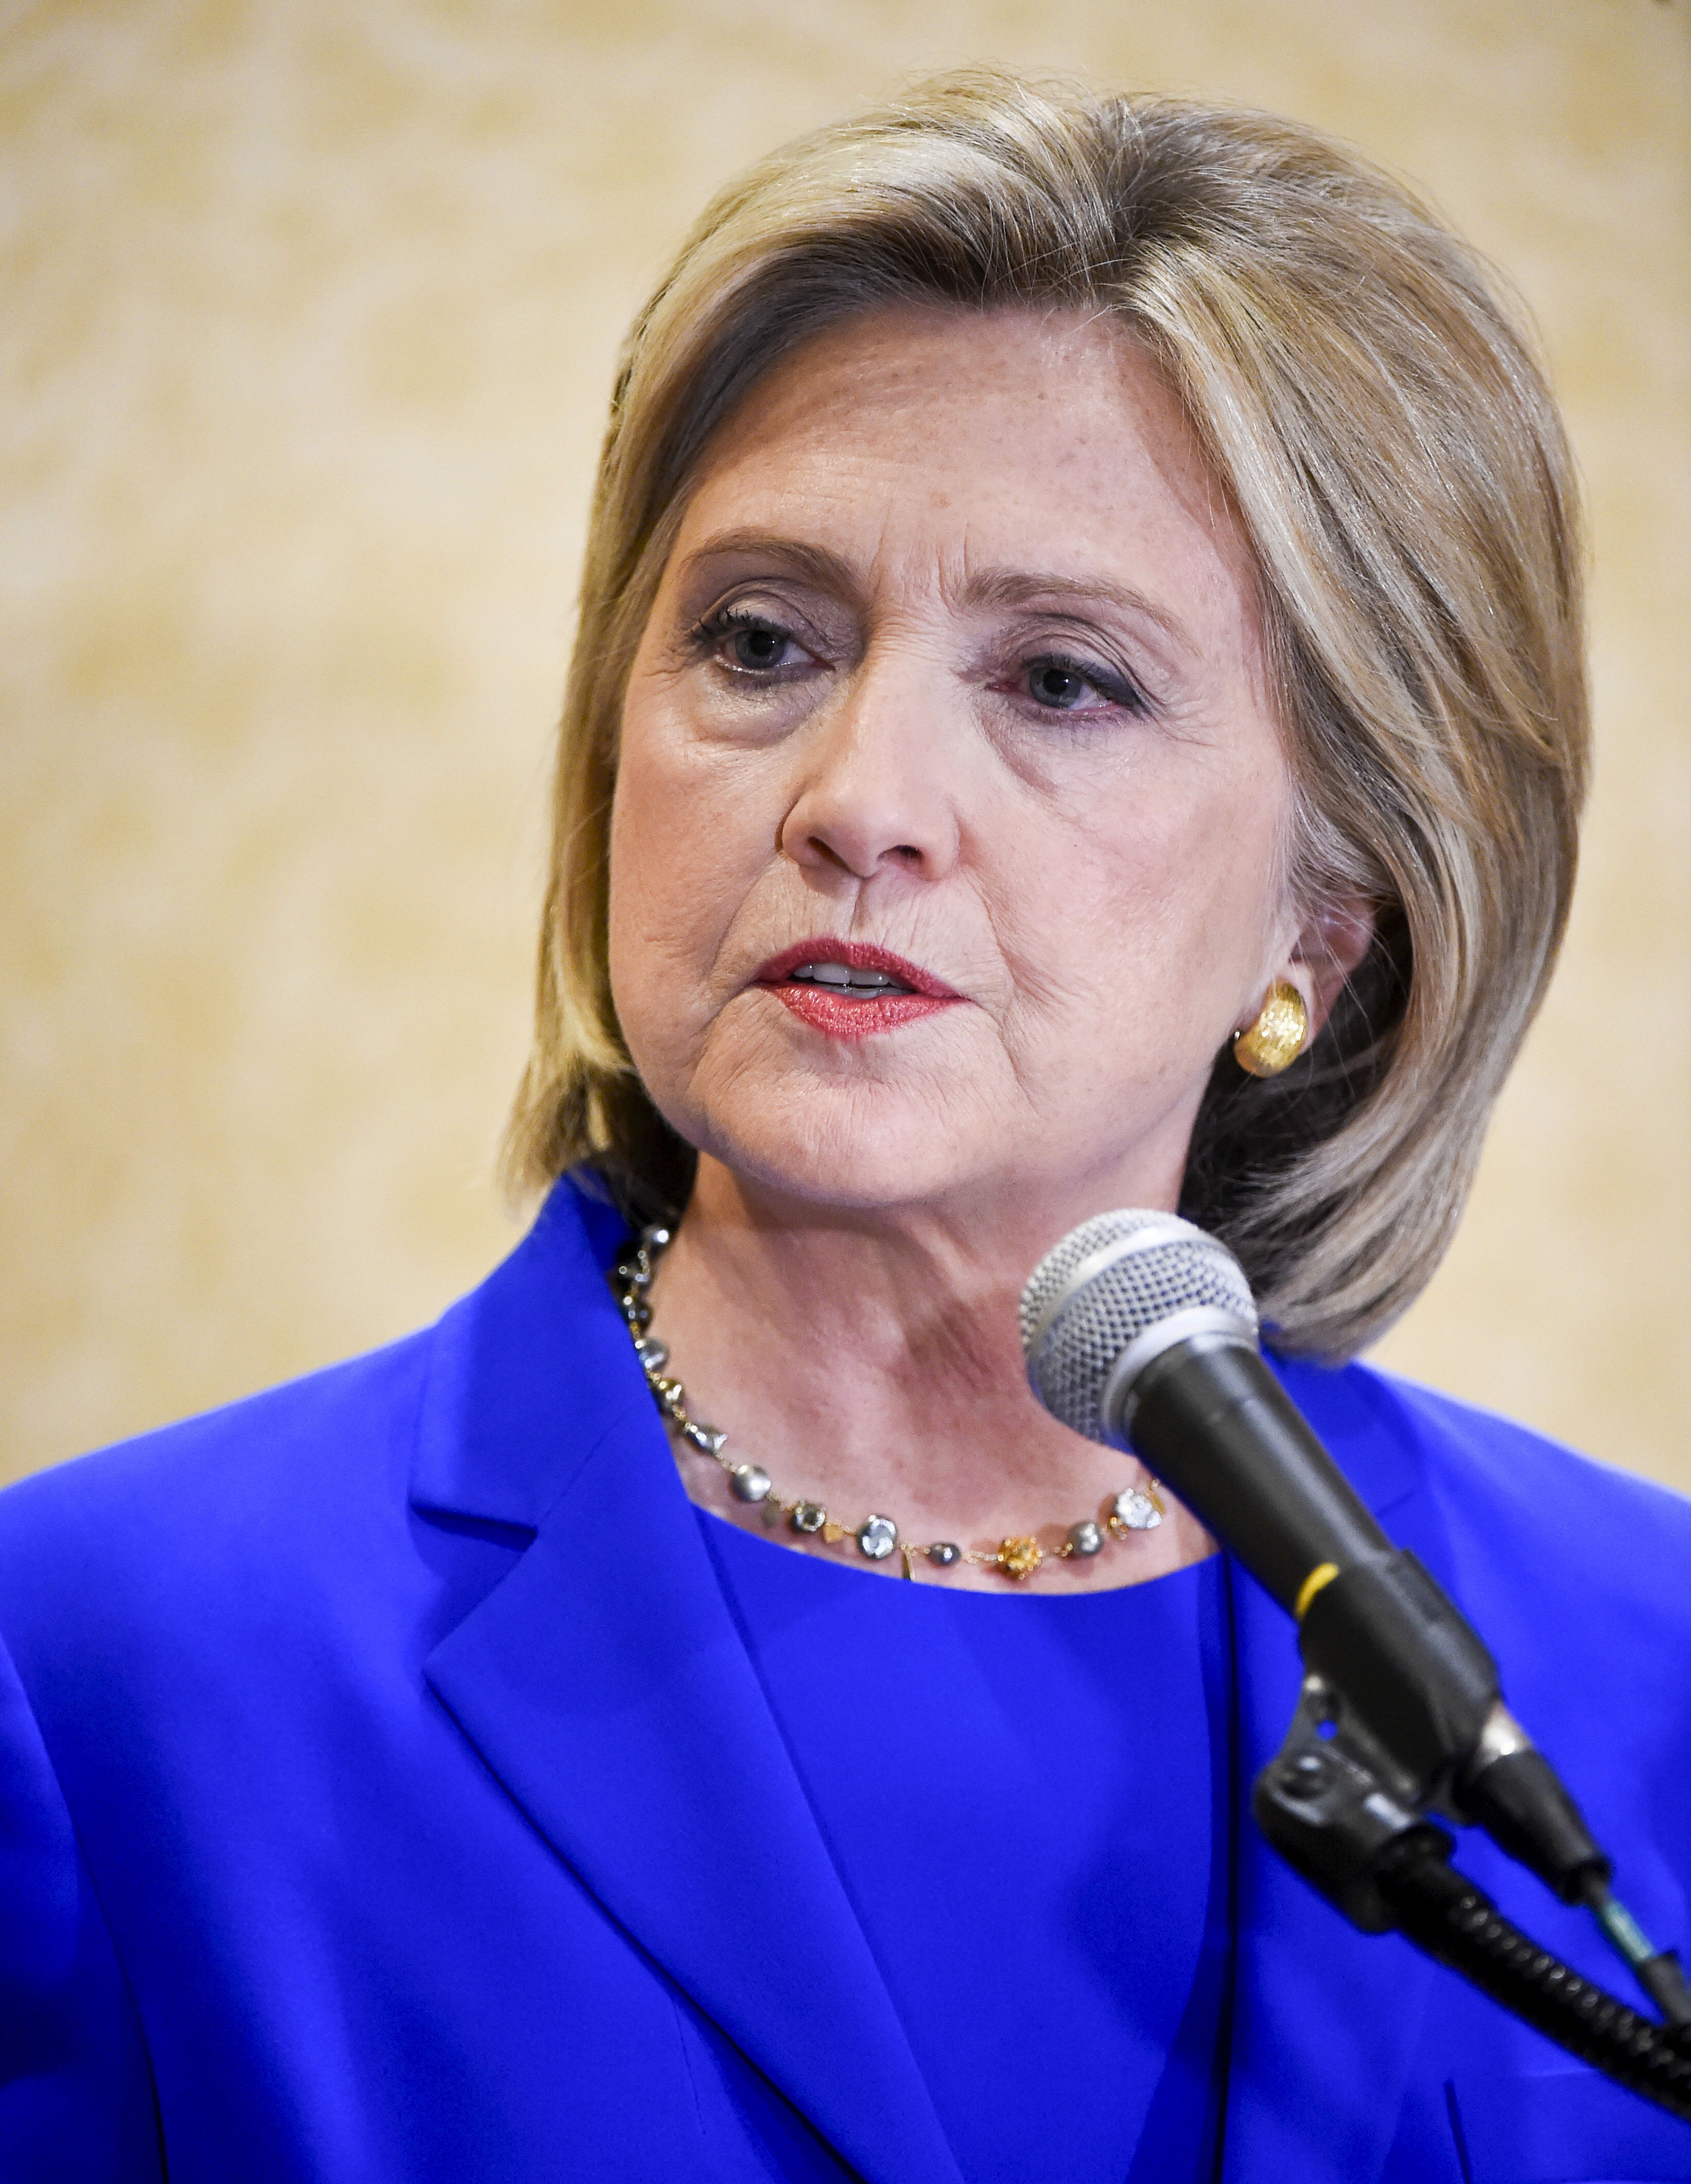 Democratic presidential candidate Hillary Clinton takes reporters questions during a news conference after she addressed the Democratic National Committee (DNC) Summer Meeting in Minneapolis on Aug. 28, 2015. (Craig Lassig—Reuters)